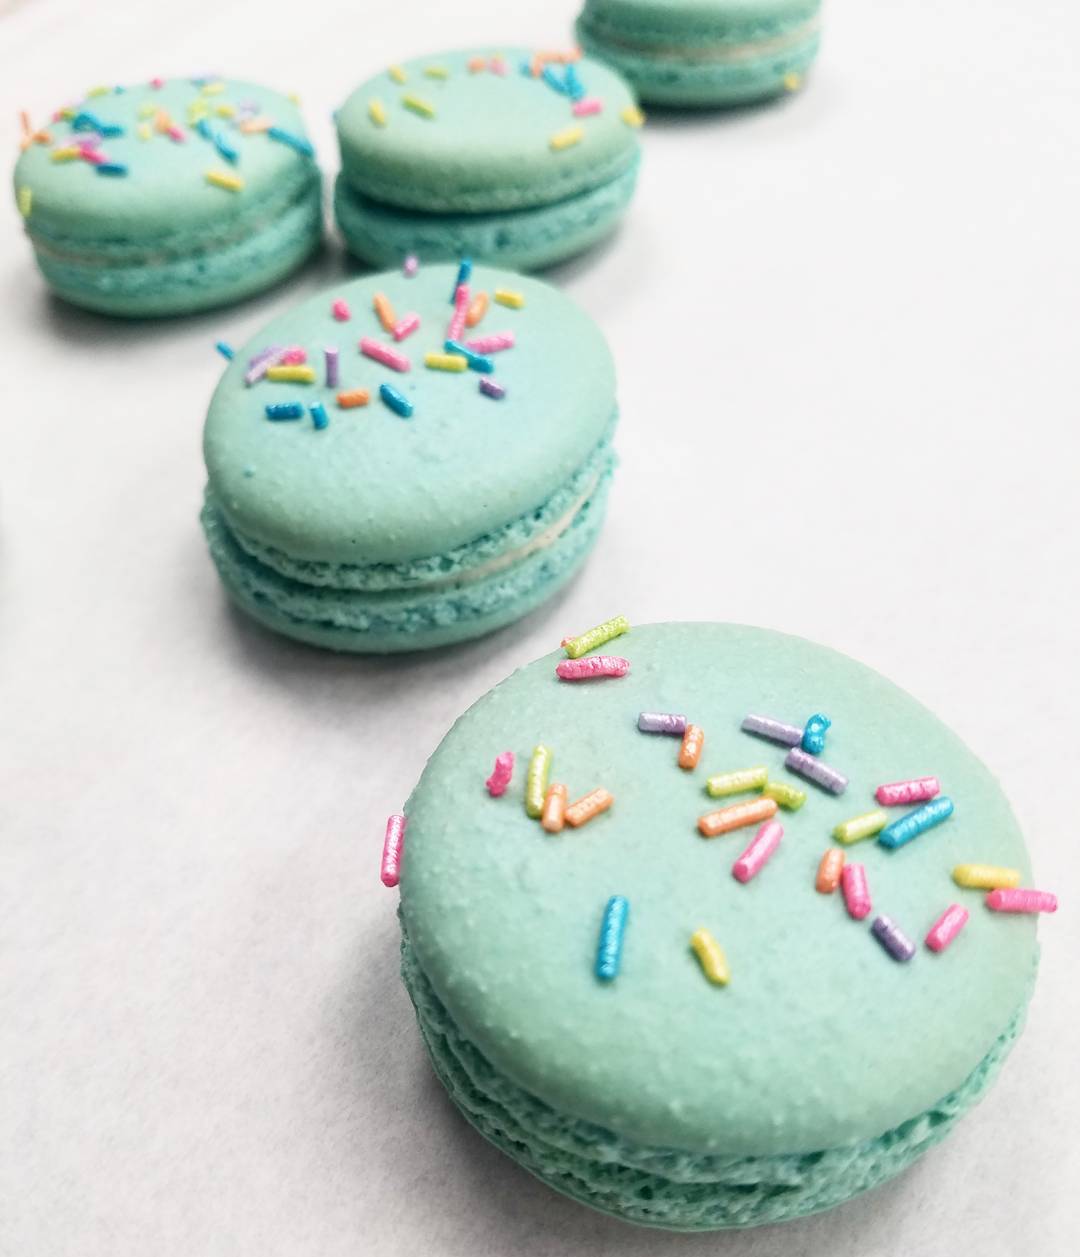 party favor custom gift catering catered baked macaron french sprinkles order online personalized convenient snack delicious